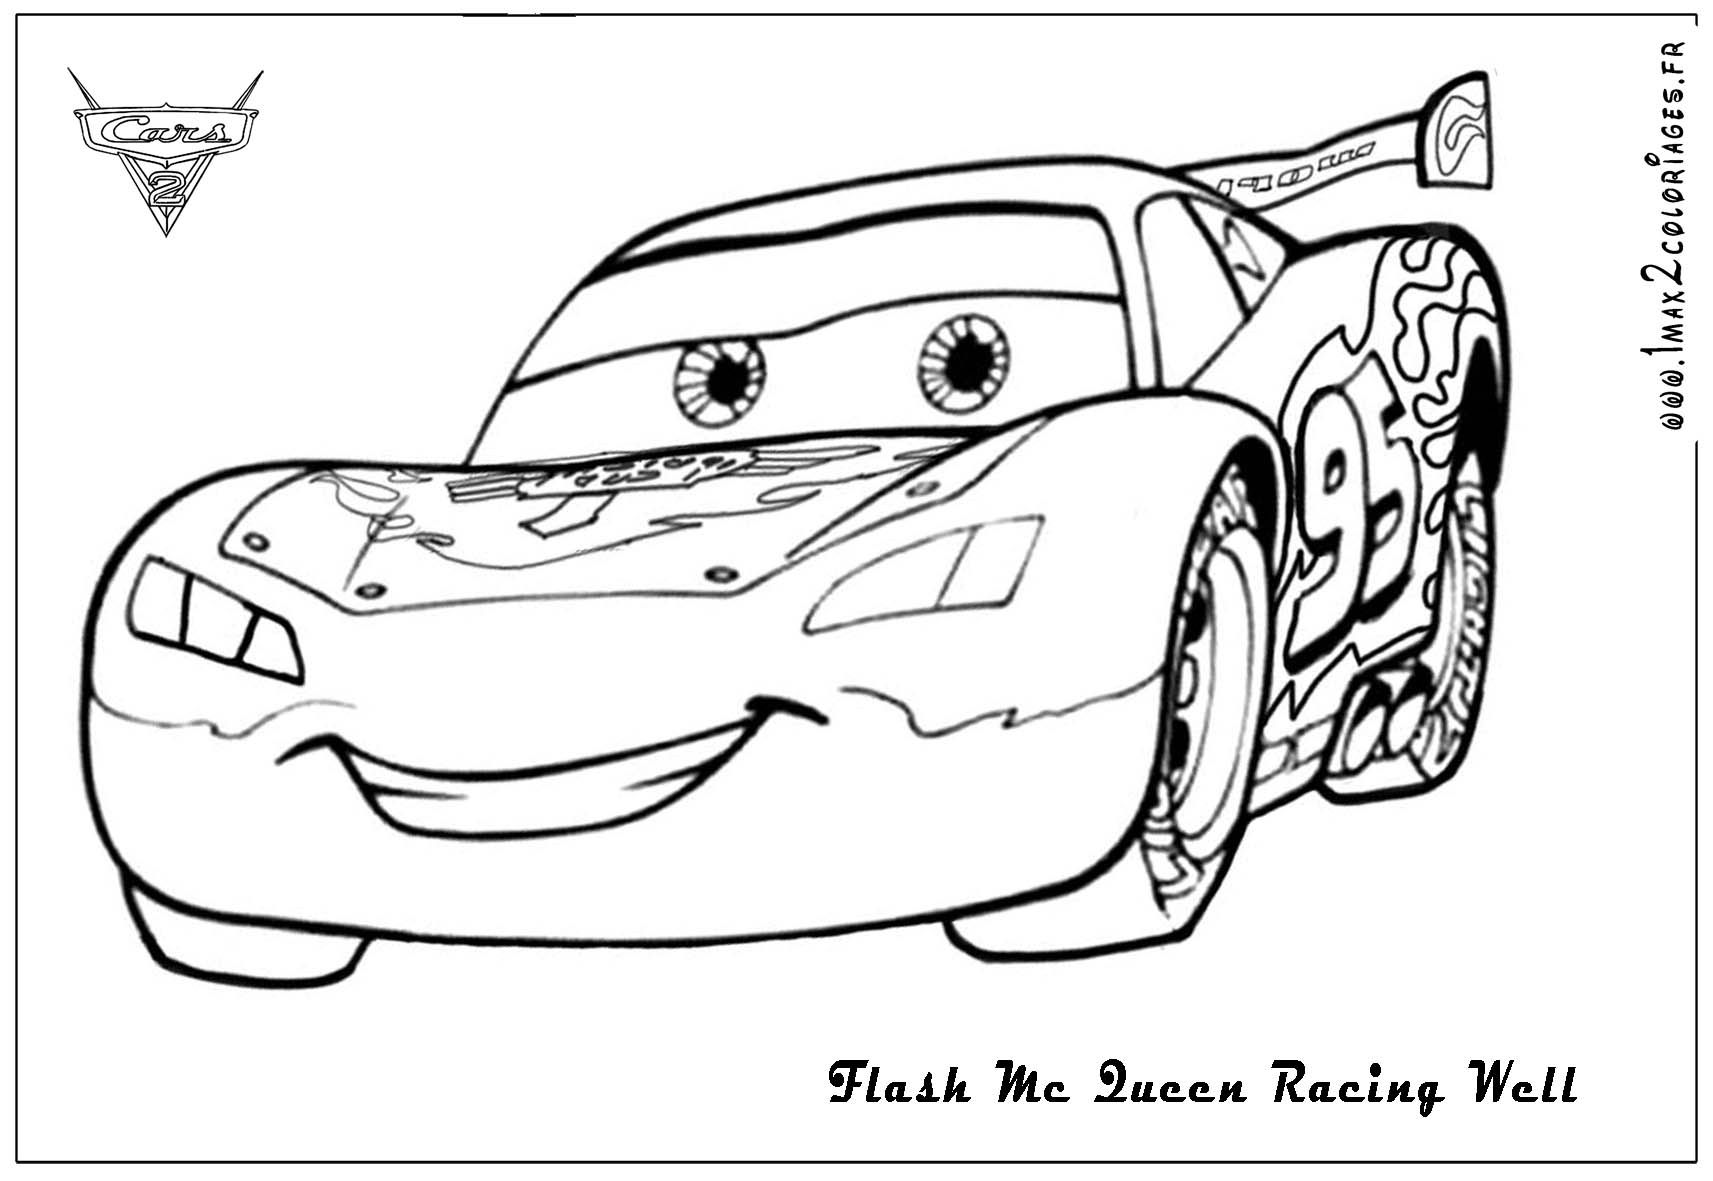 Lightning Mcqueen Coloring Page (19 Pictures) - Colorine.net | 17188